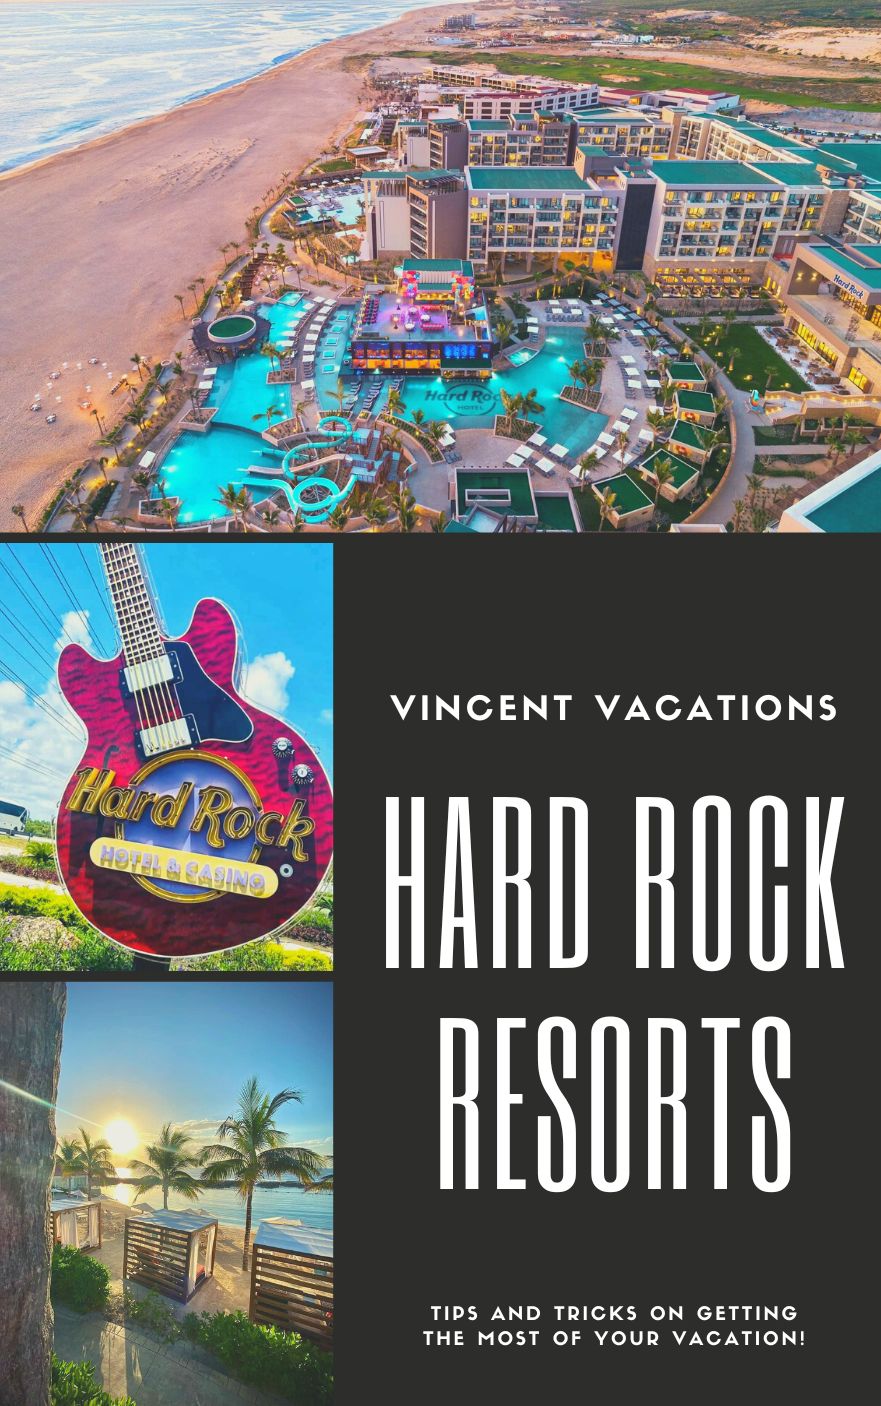 Get your <span style='color:#4e63d7;font-size:23px;'><b>FREE</b></span> Hard Rock Guide Our FREE Guide